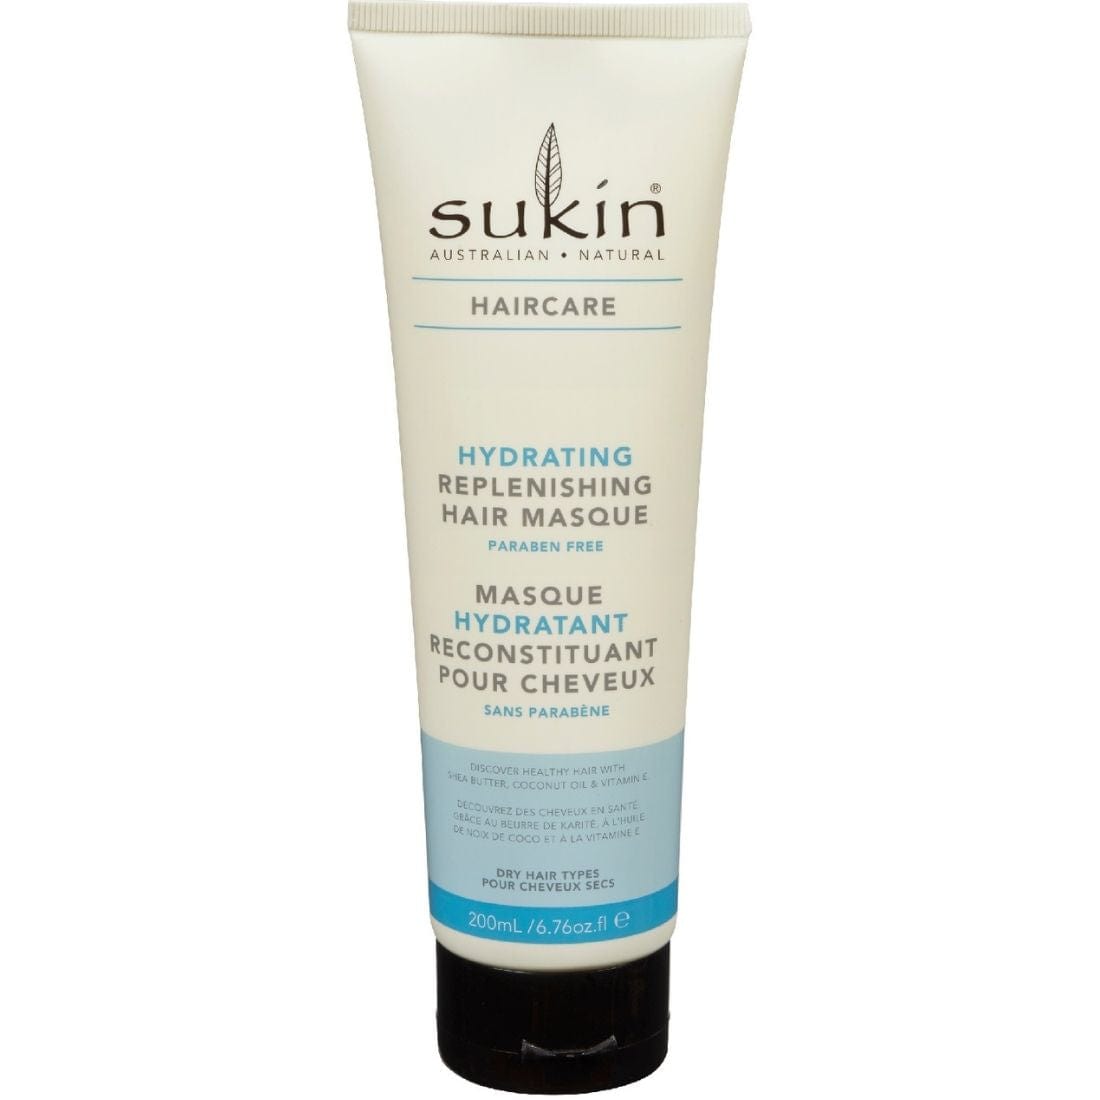 Sukin Hydrating Replenishing Hair Masque, 200 ml - (Tube), Clearance 40% Off, Final Sale